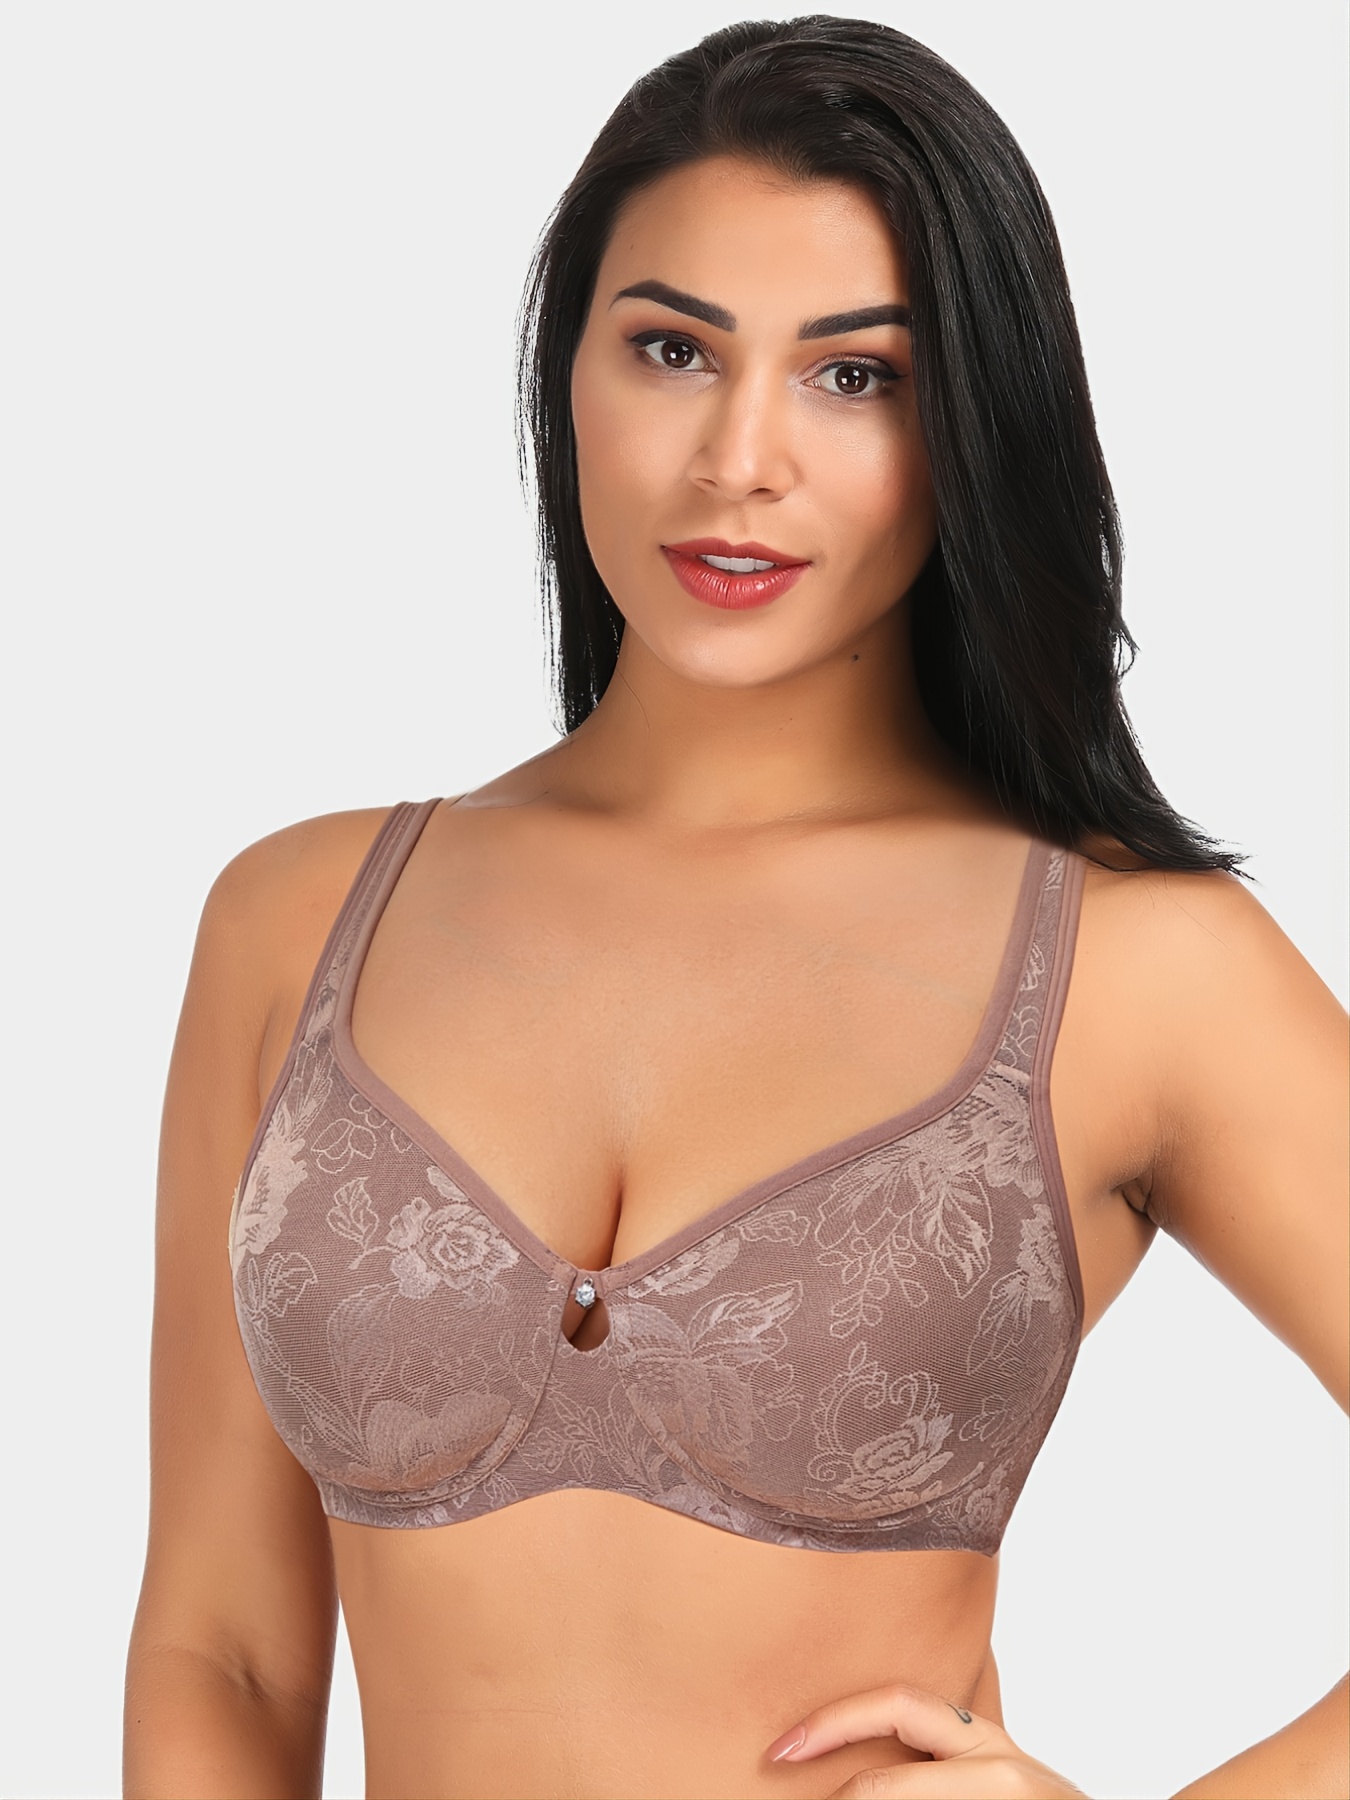 Women Plus Size Bra Full Coverage Wirefree Comfort Lace Bralettes 